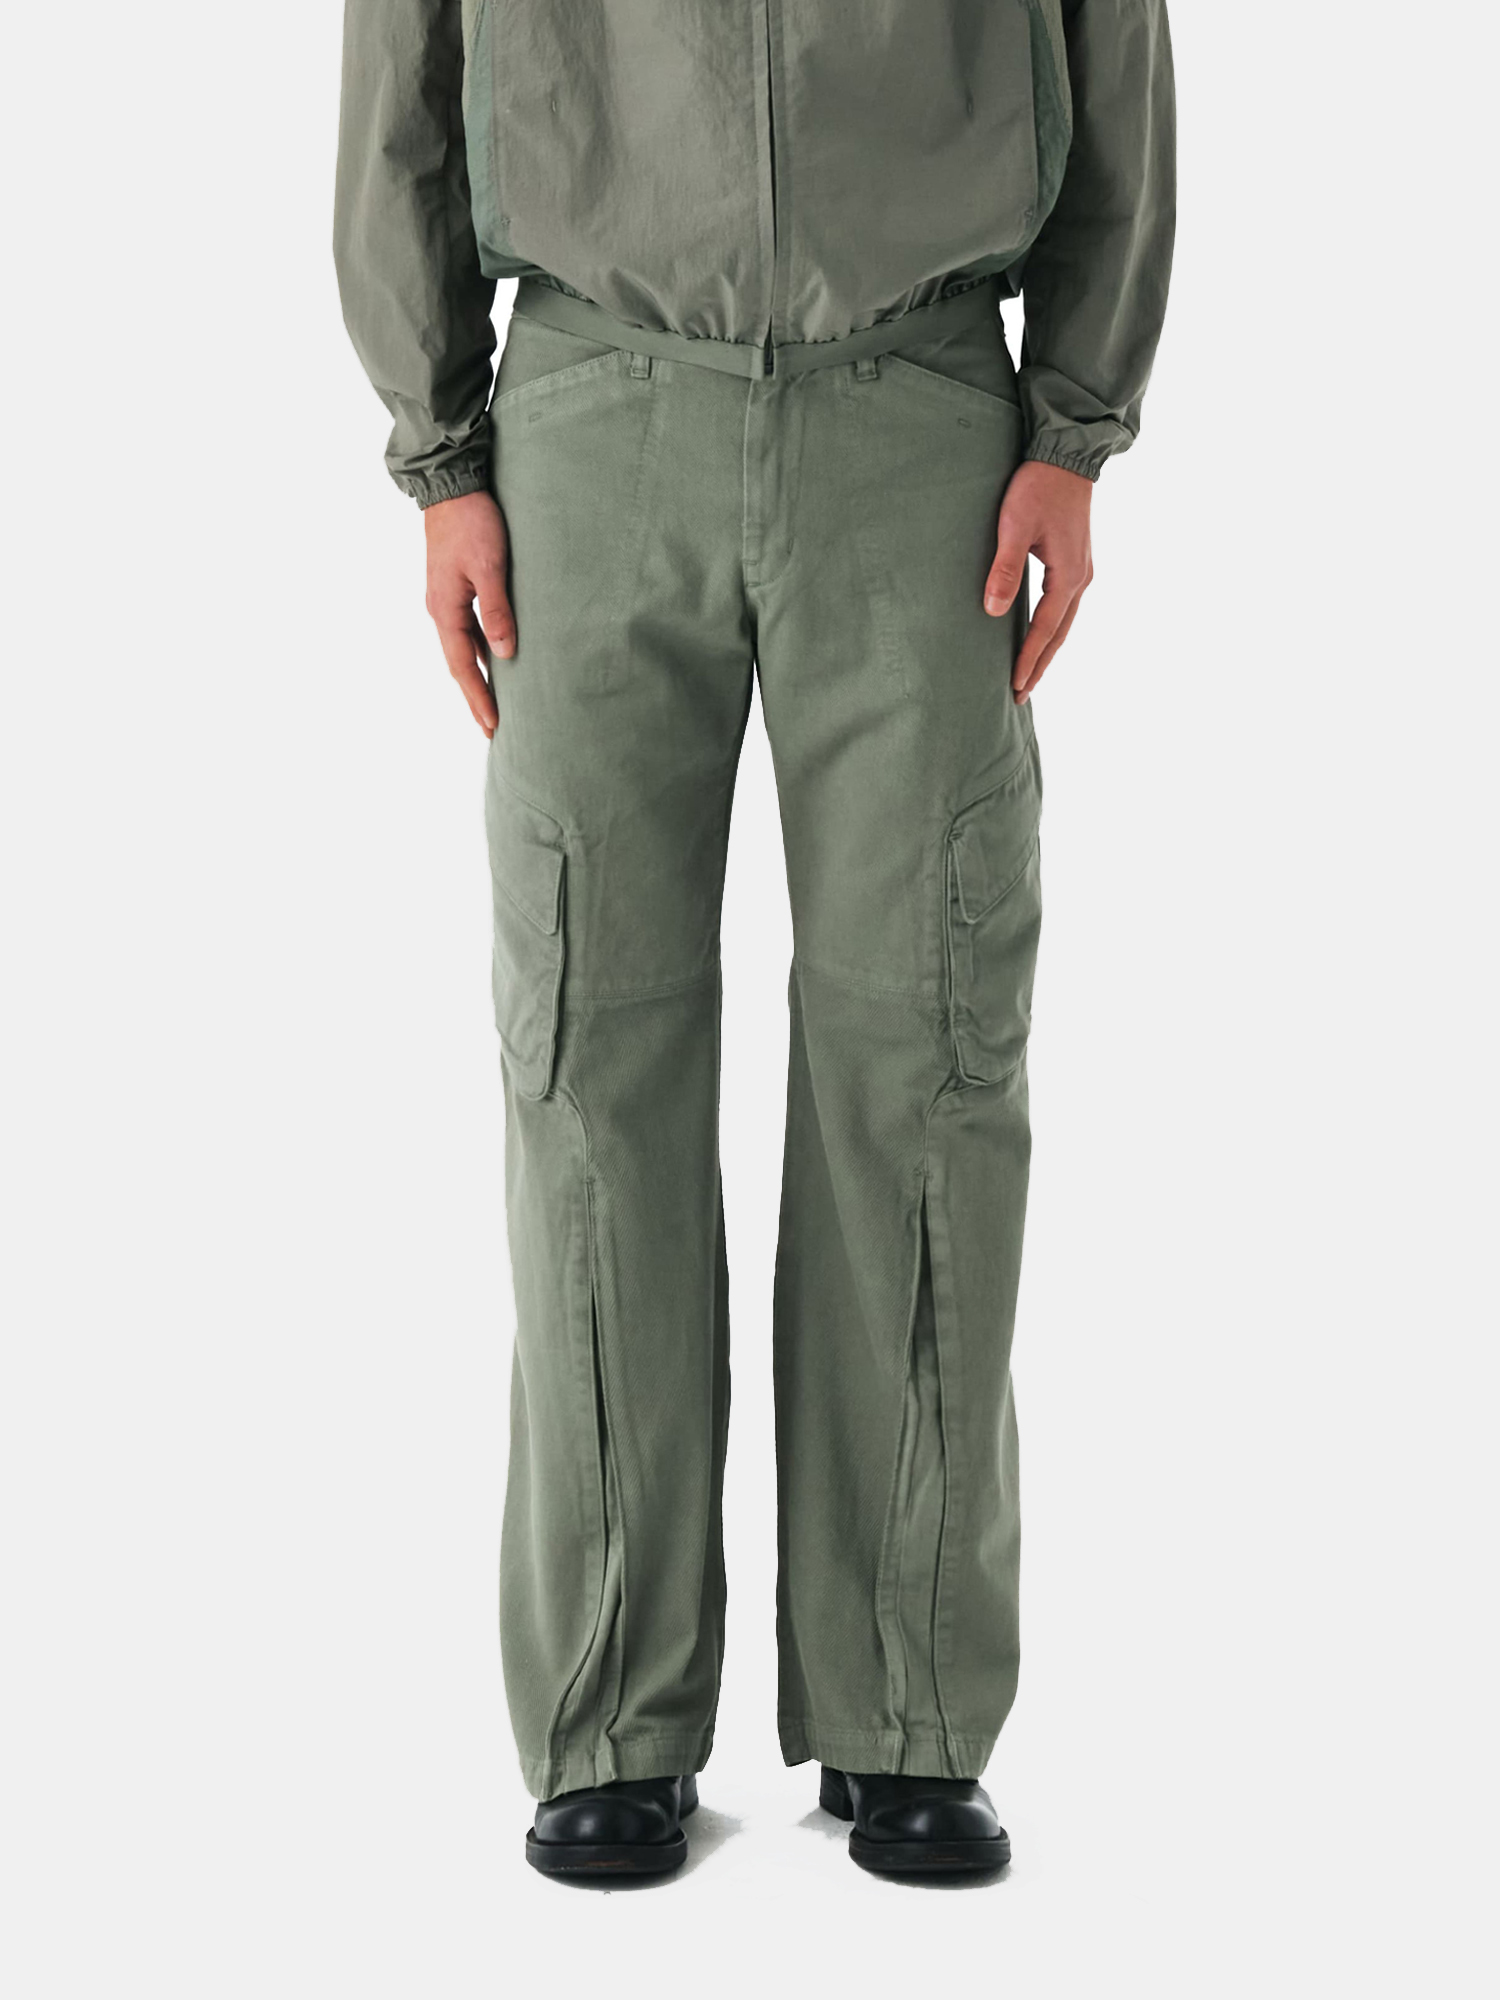 EE GARMENTS DYED CARGO BOOTCUT PANTS-OLIVE